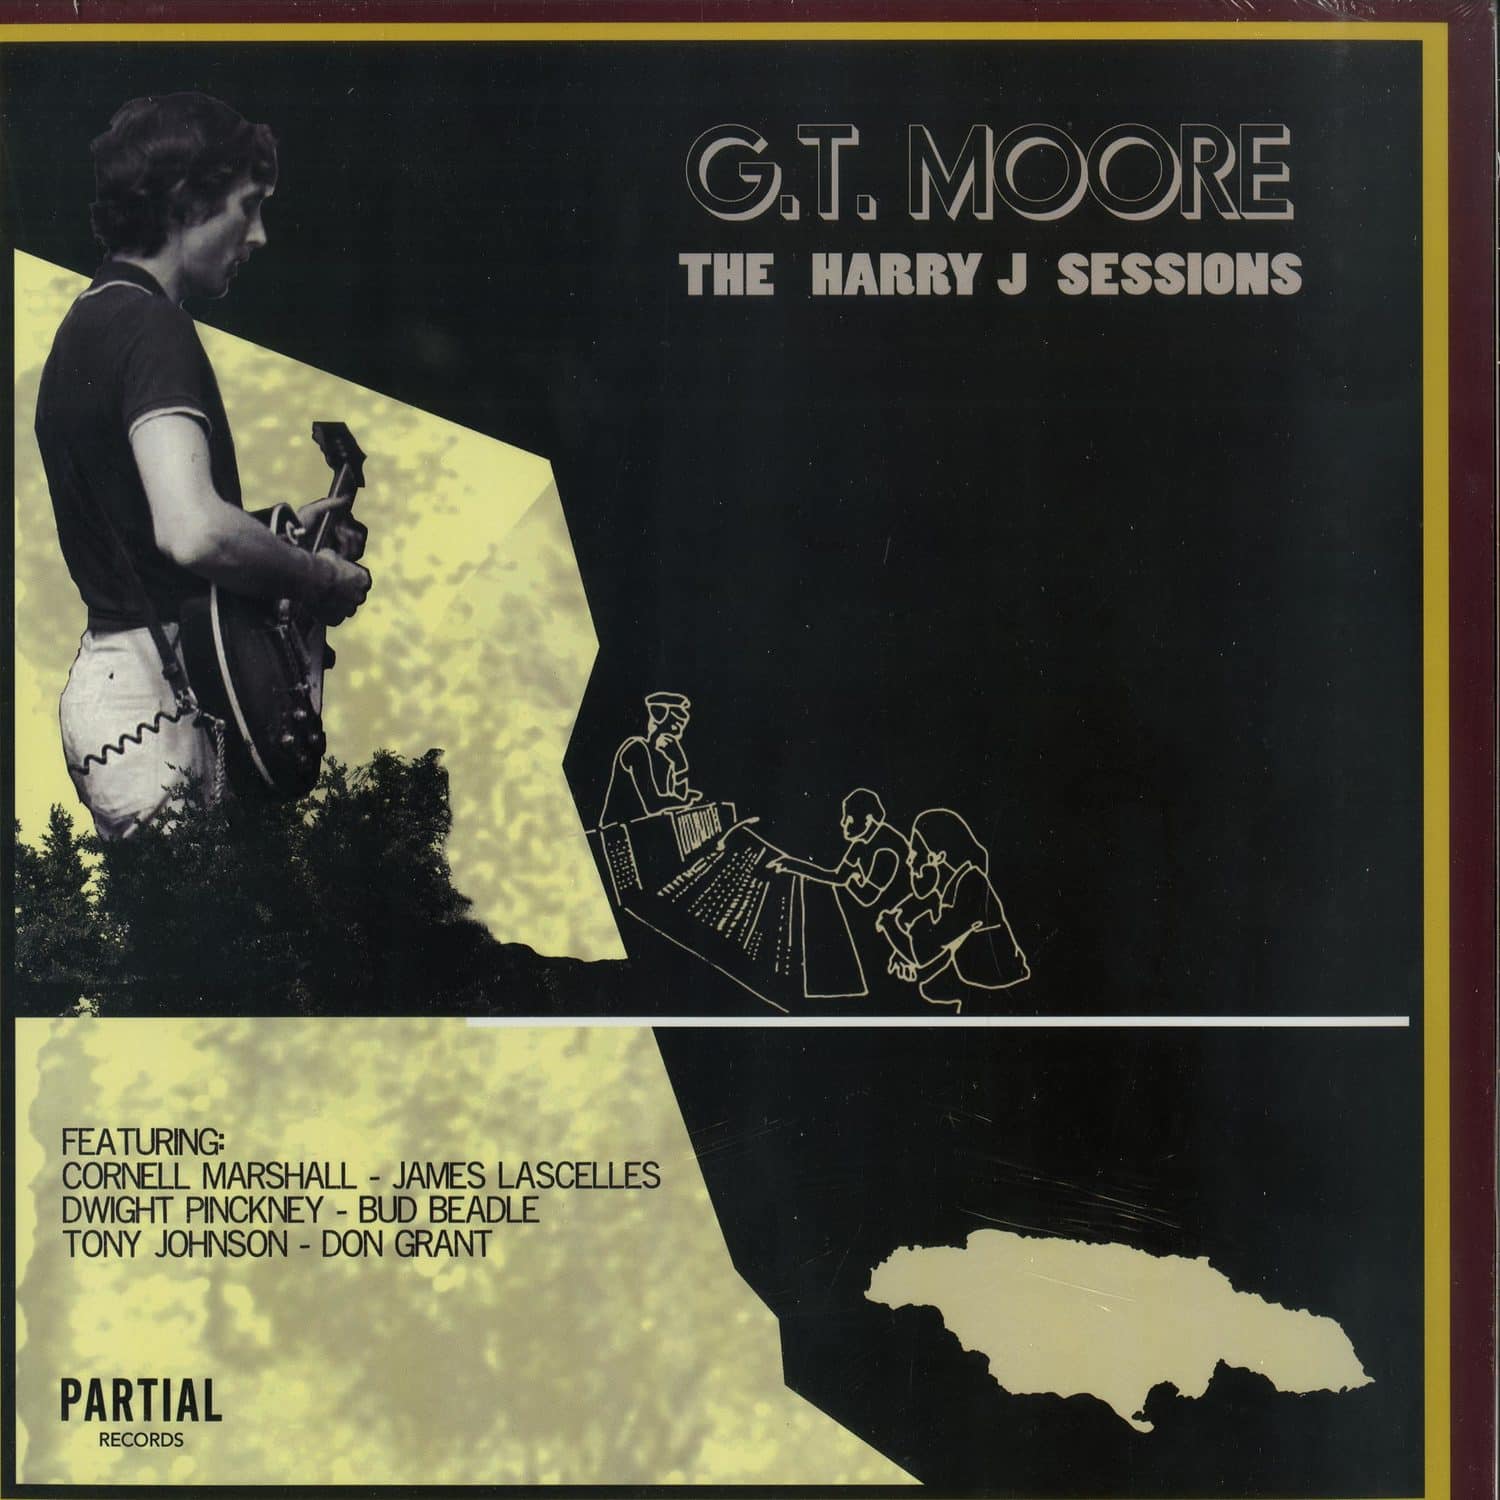 G.T. Moore - THE HARRY J SESSIONS 